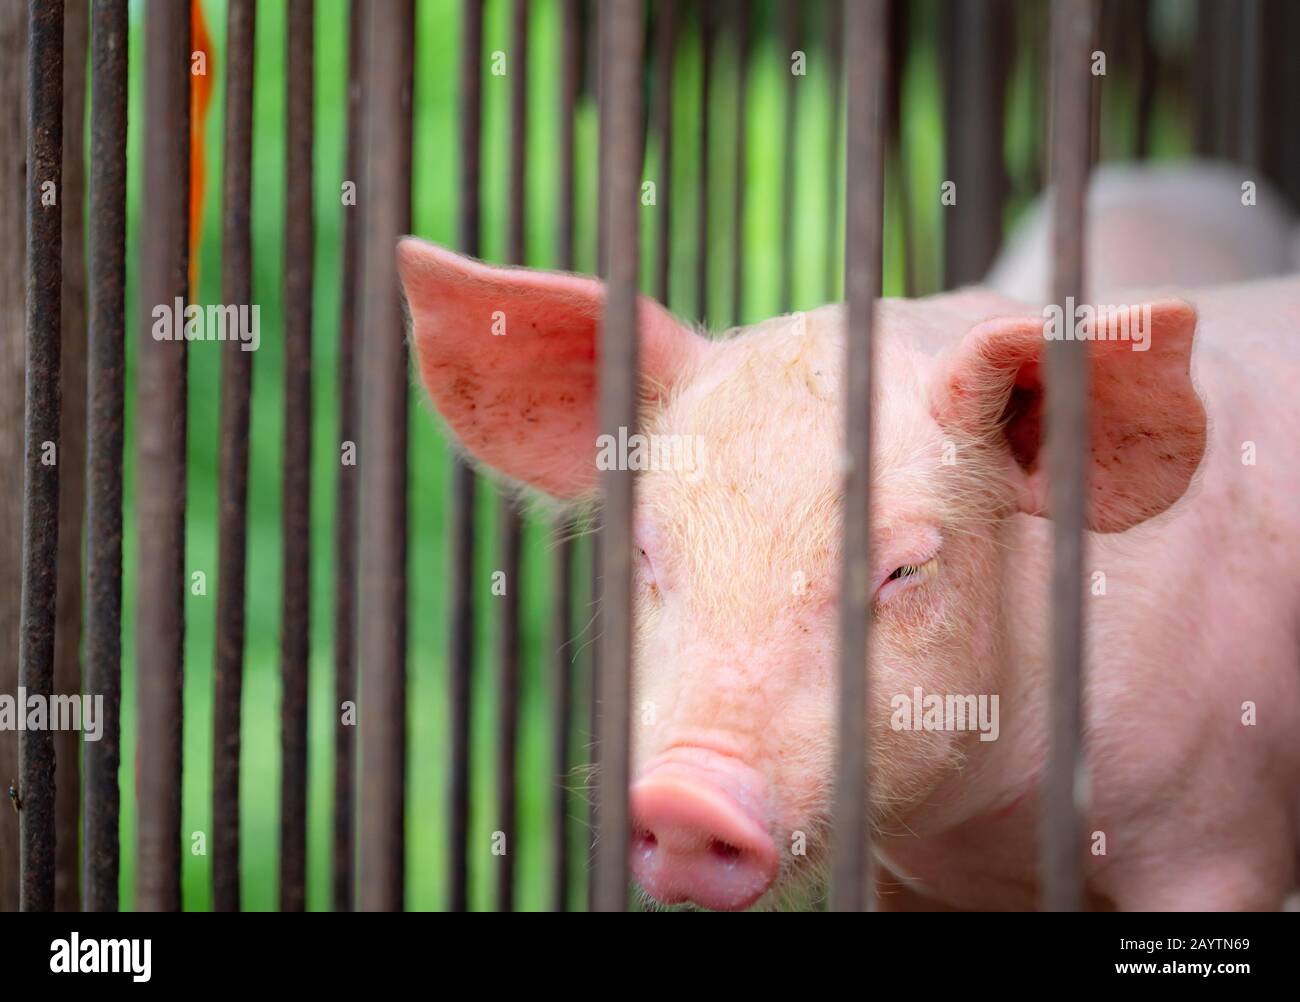 Little pig in farm. Small pink piglet. African swine fever and swine flu concept. Livestock farming. Pork meat industry. Healthy and cute pig Stock Photo